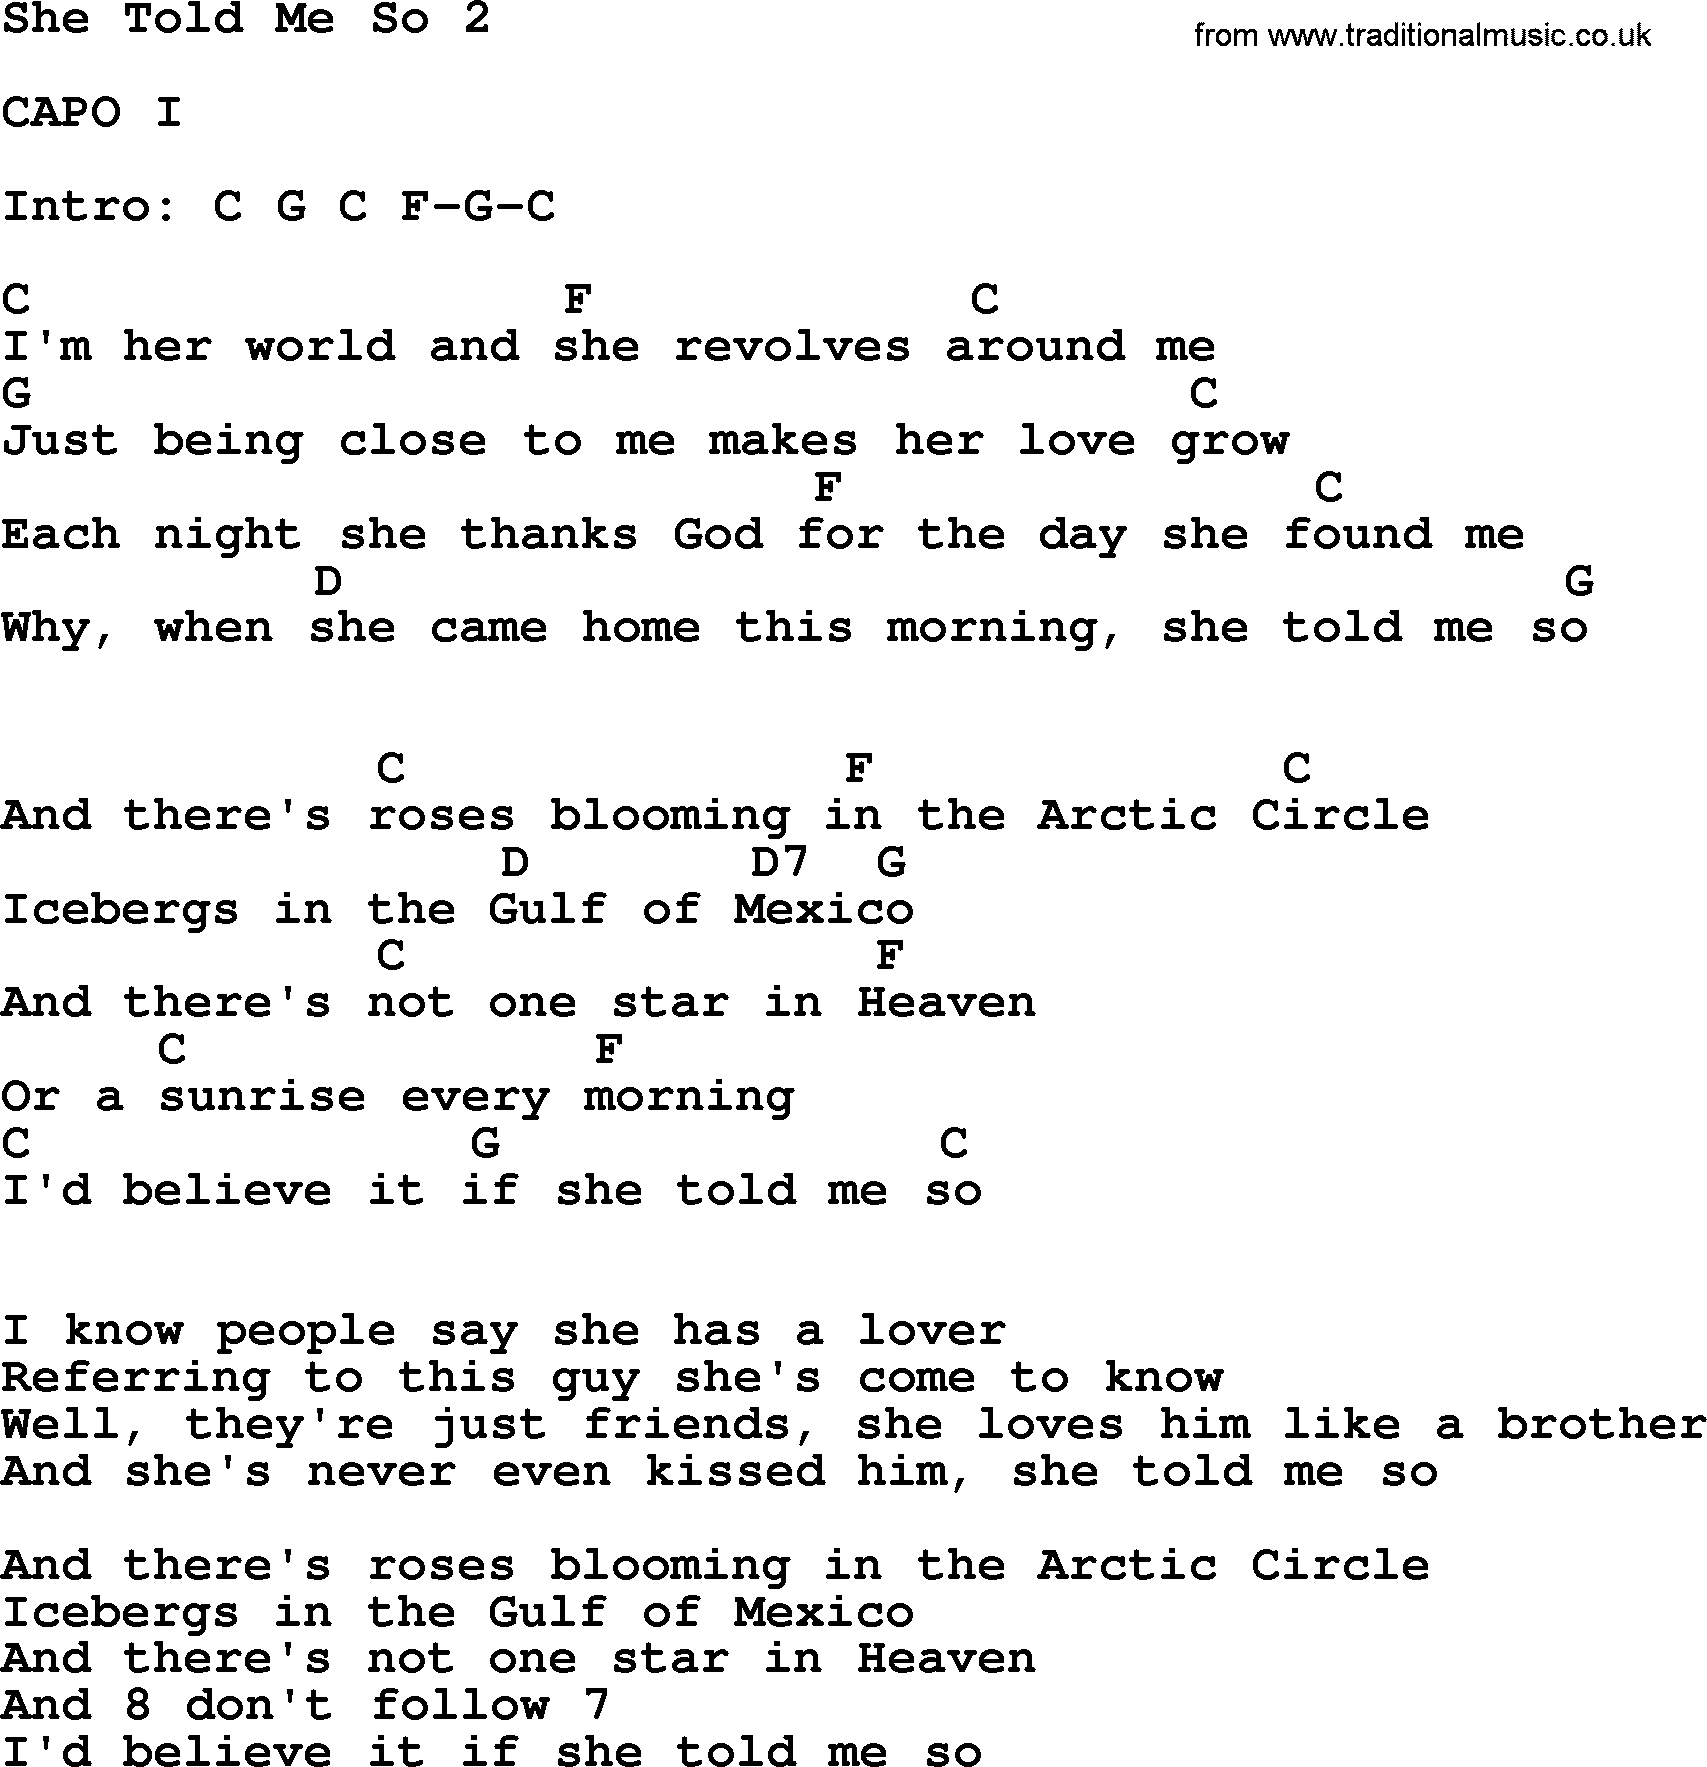 George Strait song: She Told Me So 2, lyrics and chords